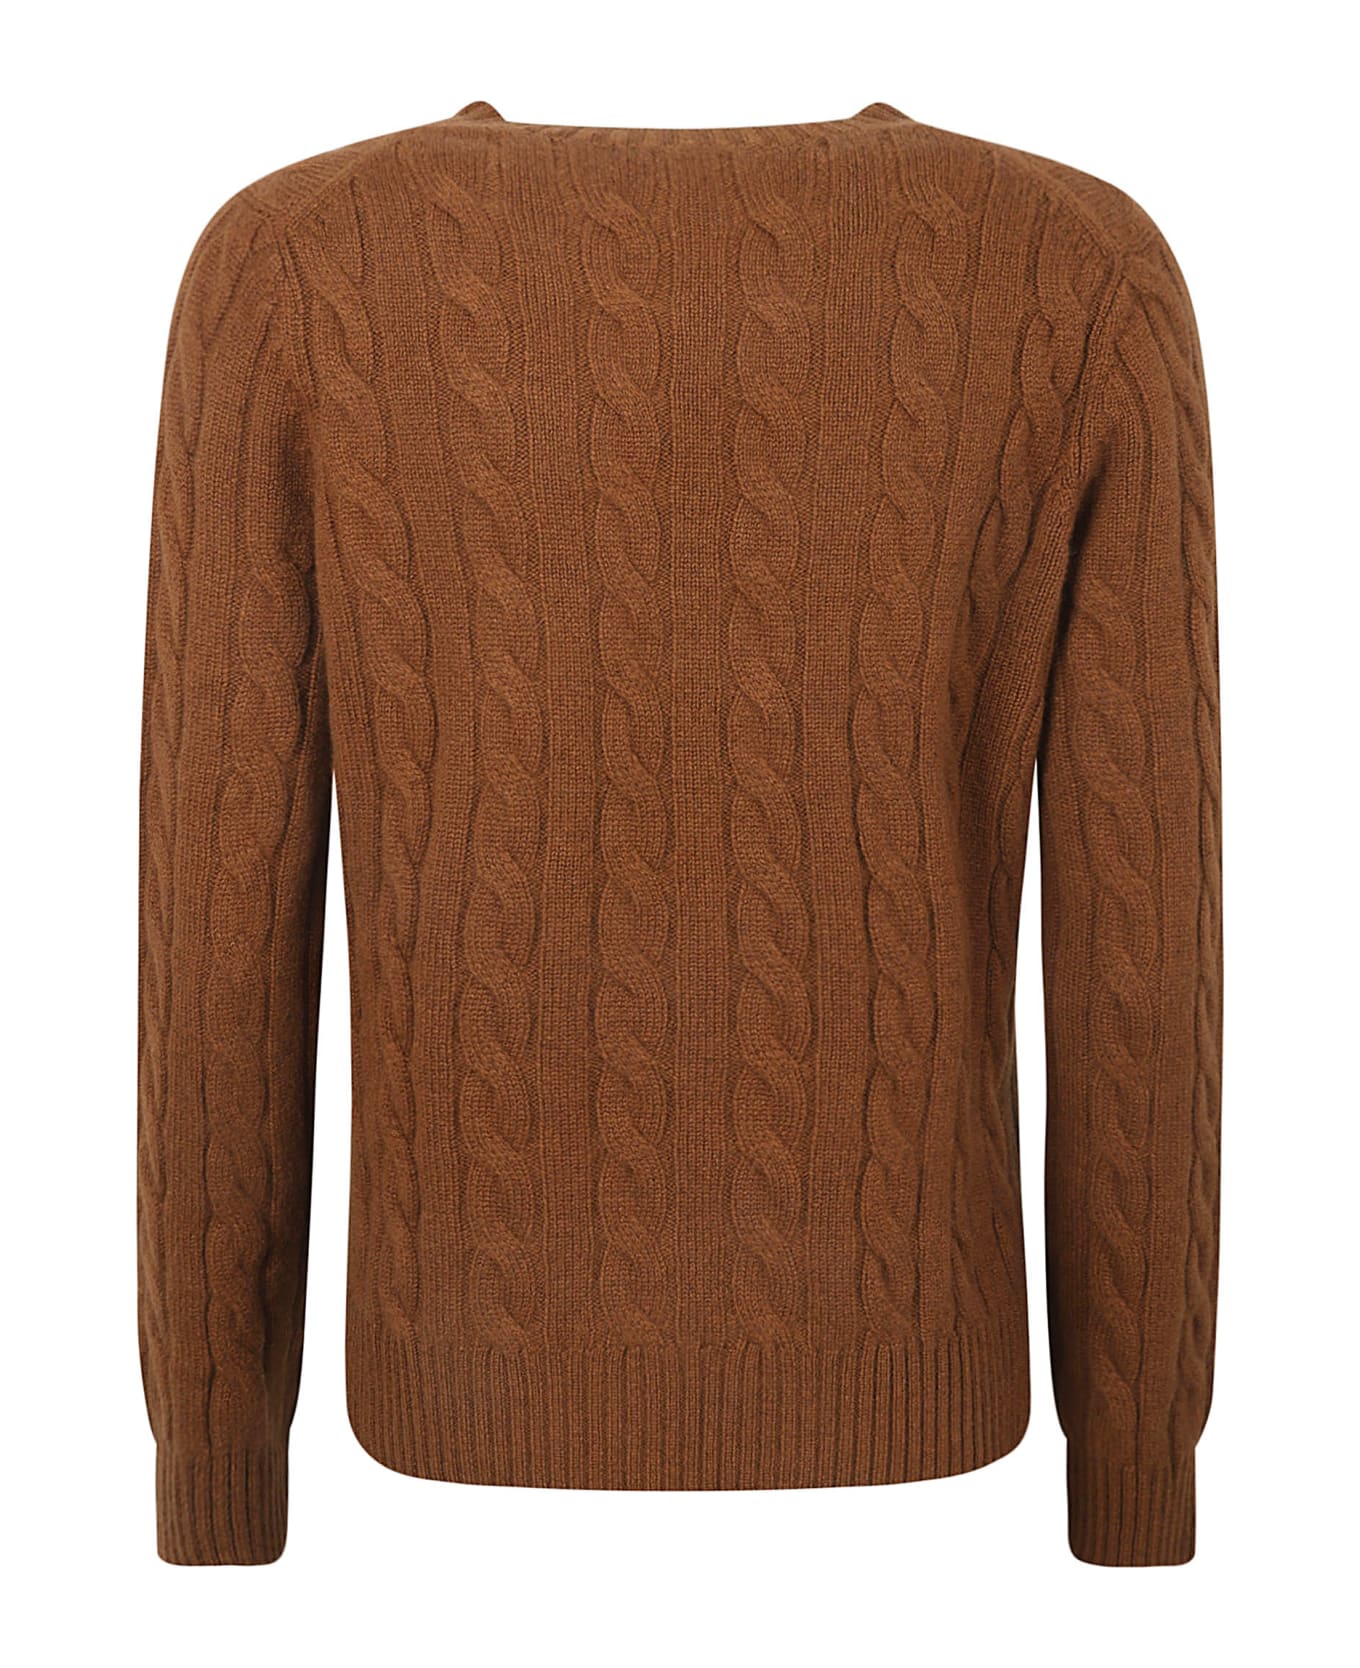 Be You Knitted Sweater - Caramel